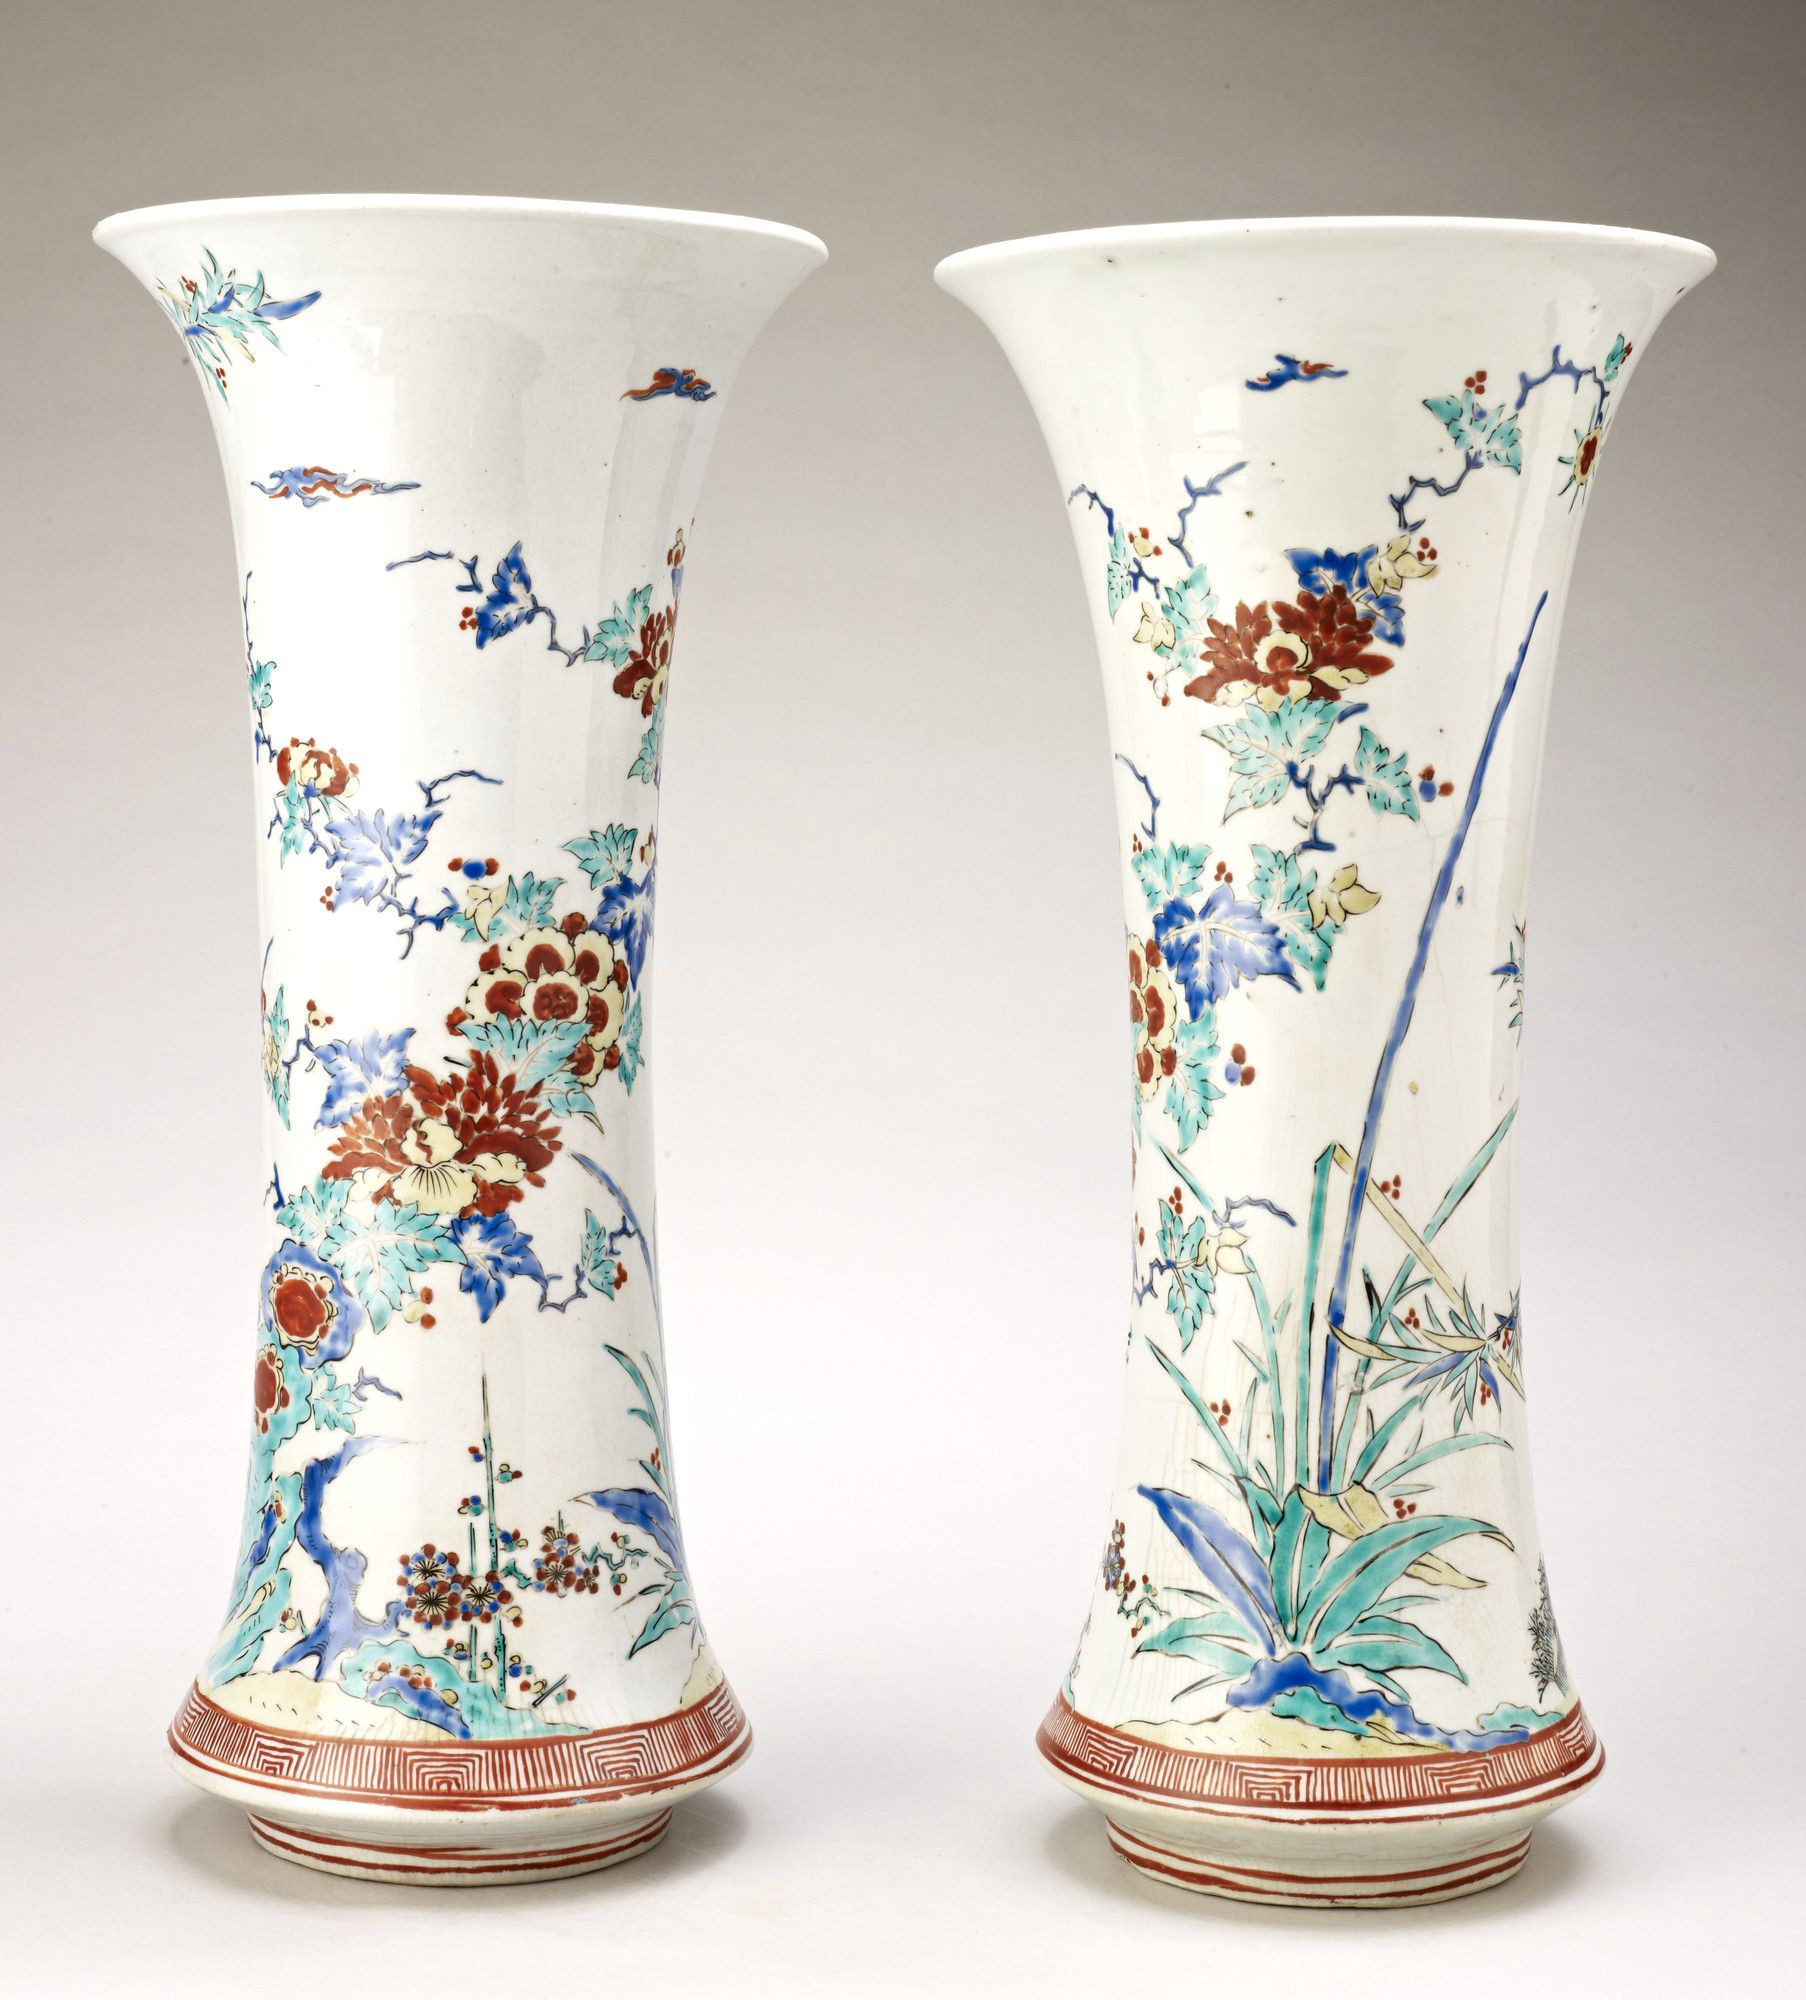 27 Awesome Limoges Vase Prices 2024 free download limoges vase prices of a pair of trumpet shaped vases with flaring mouths expanding with regard to a pair of trumpet shaped vases with flaring mouths expanding towards base then sharply rest